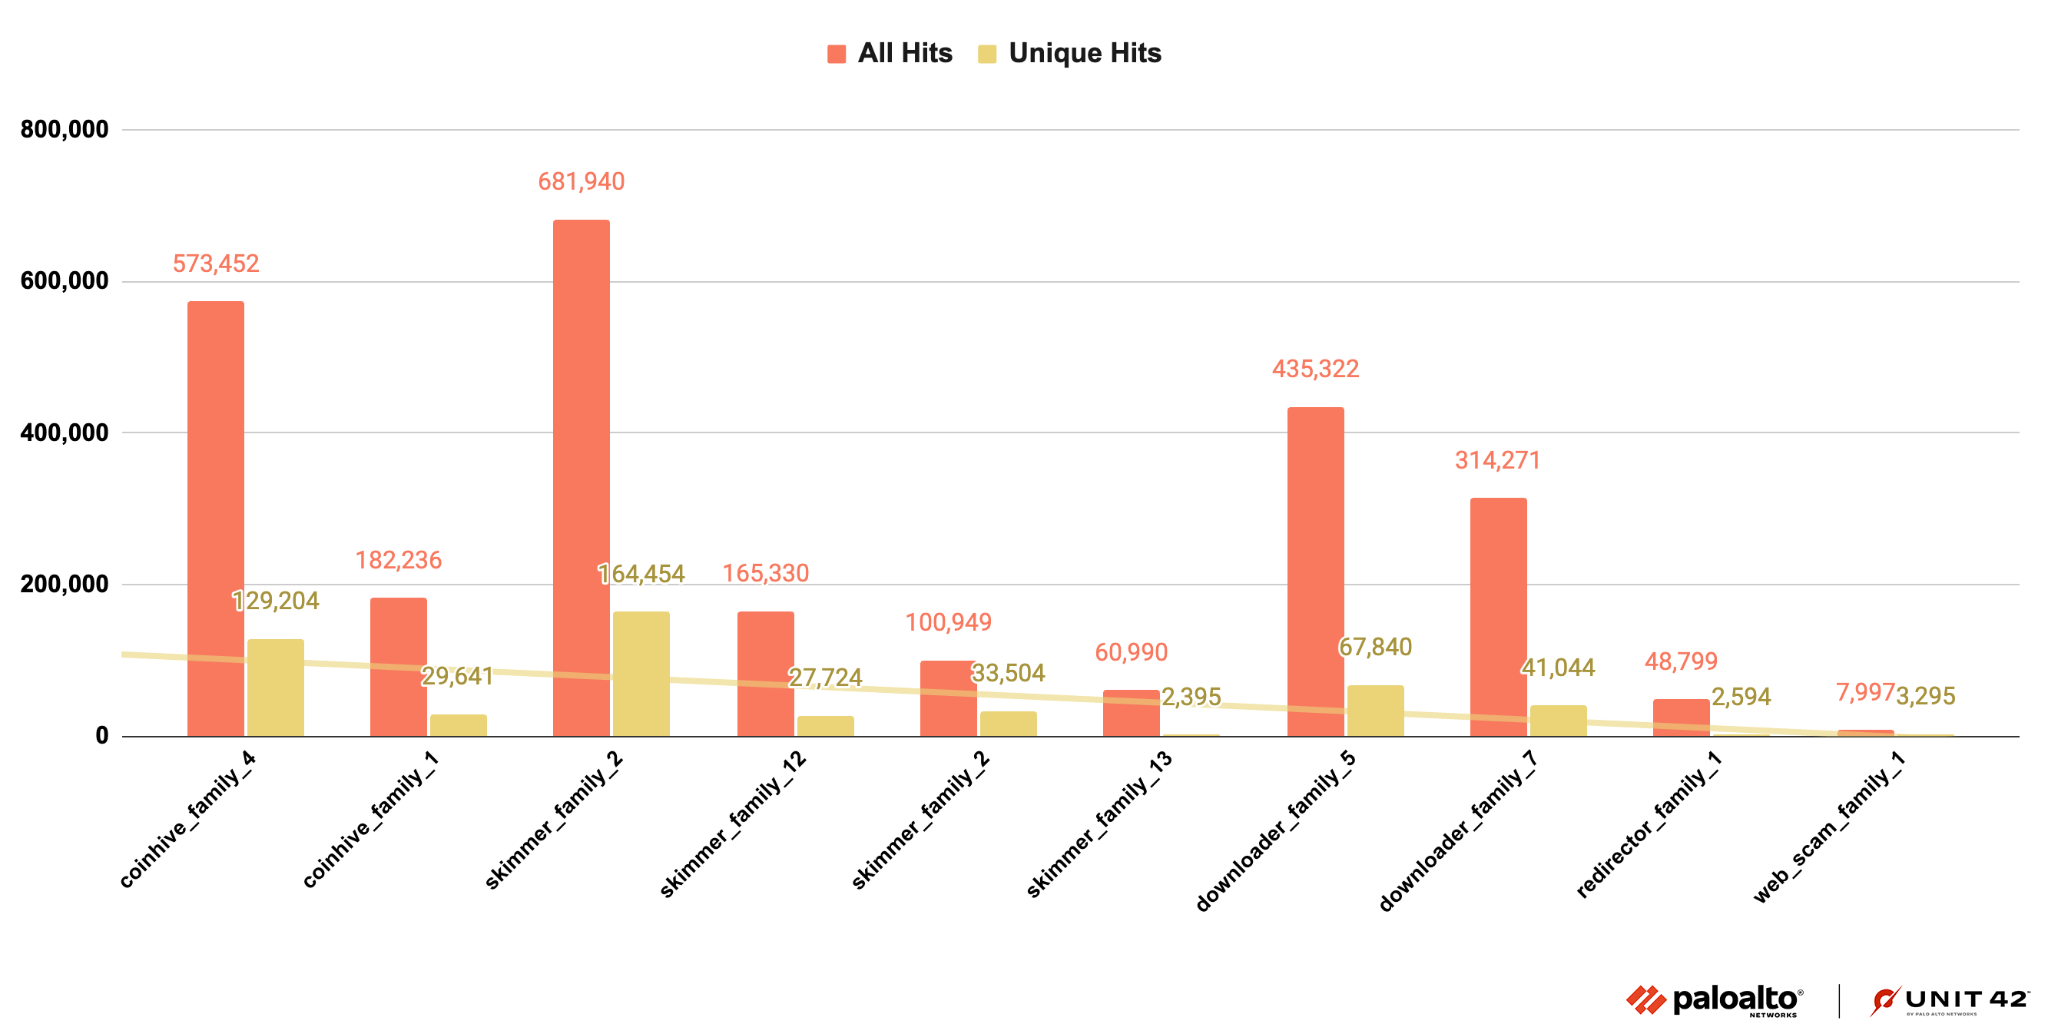 Image 12 is a column chart comparing the web threat malware family distribution from July through December 2022. All hits is the greatest amount compared to unique hits in each instance.